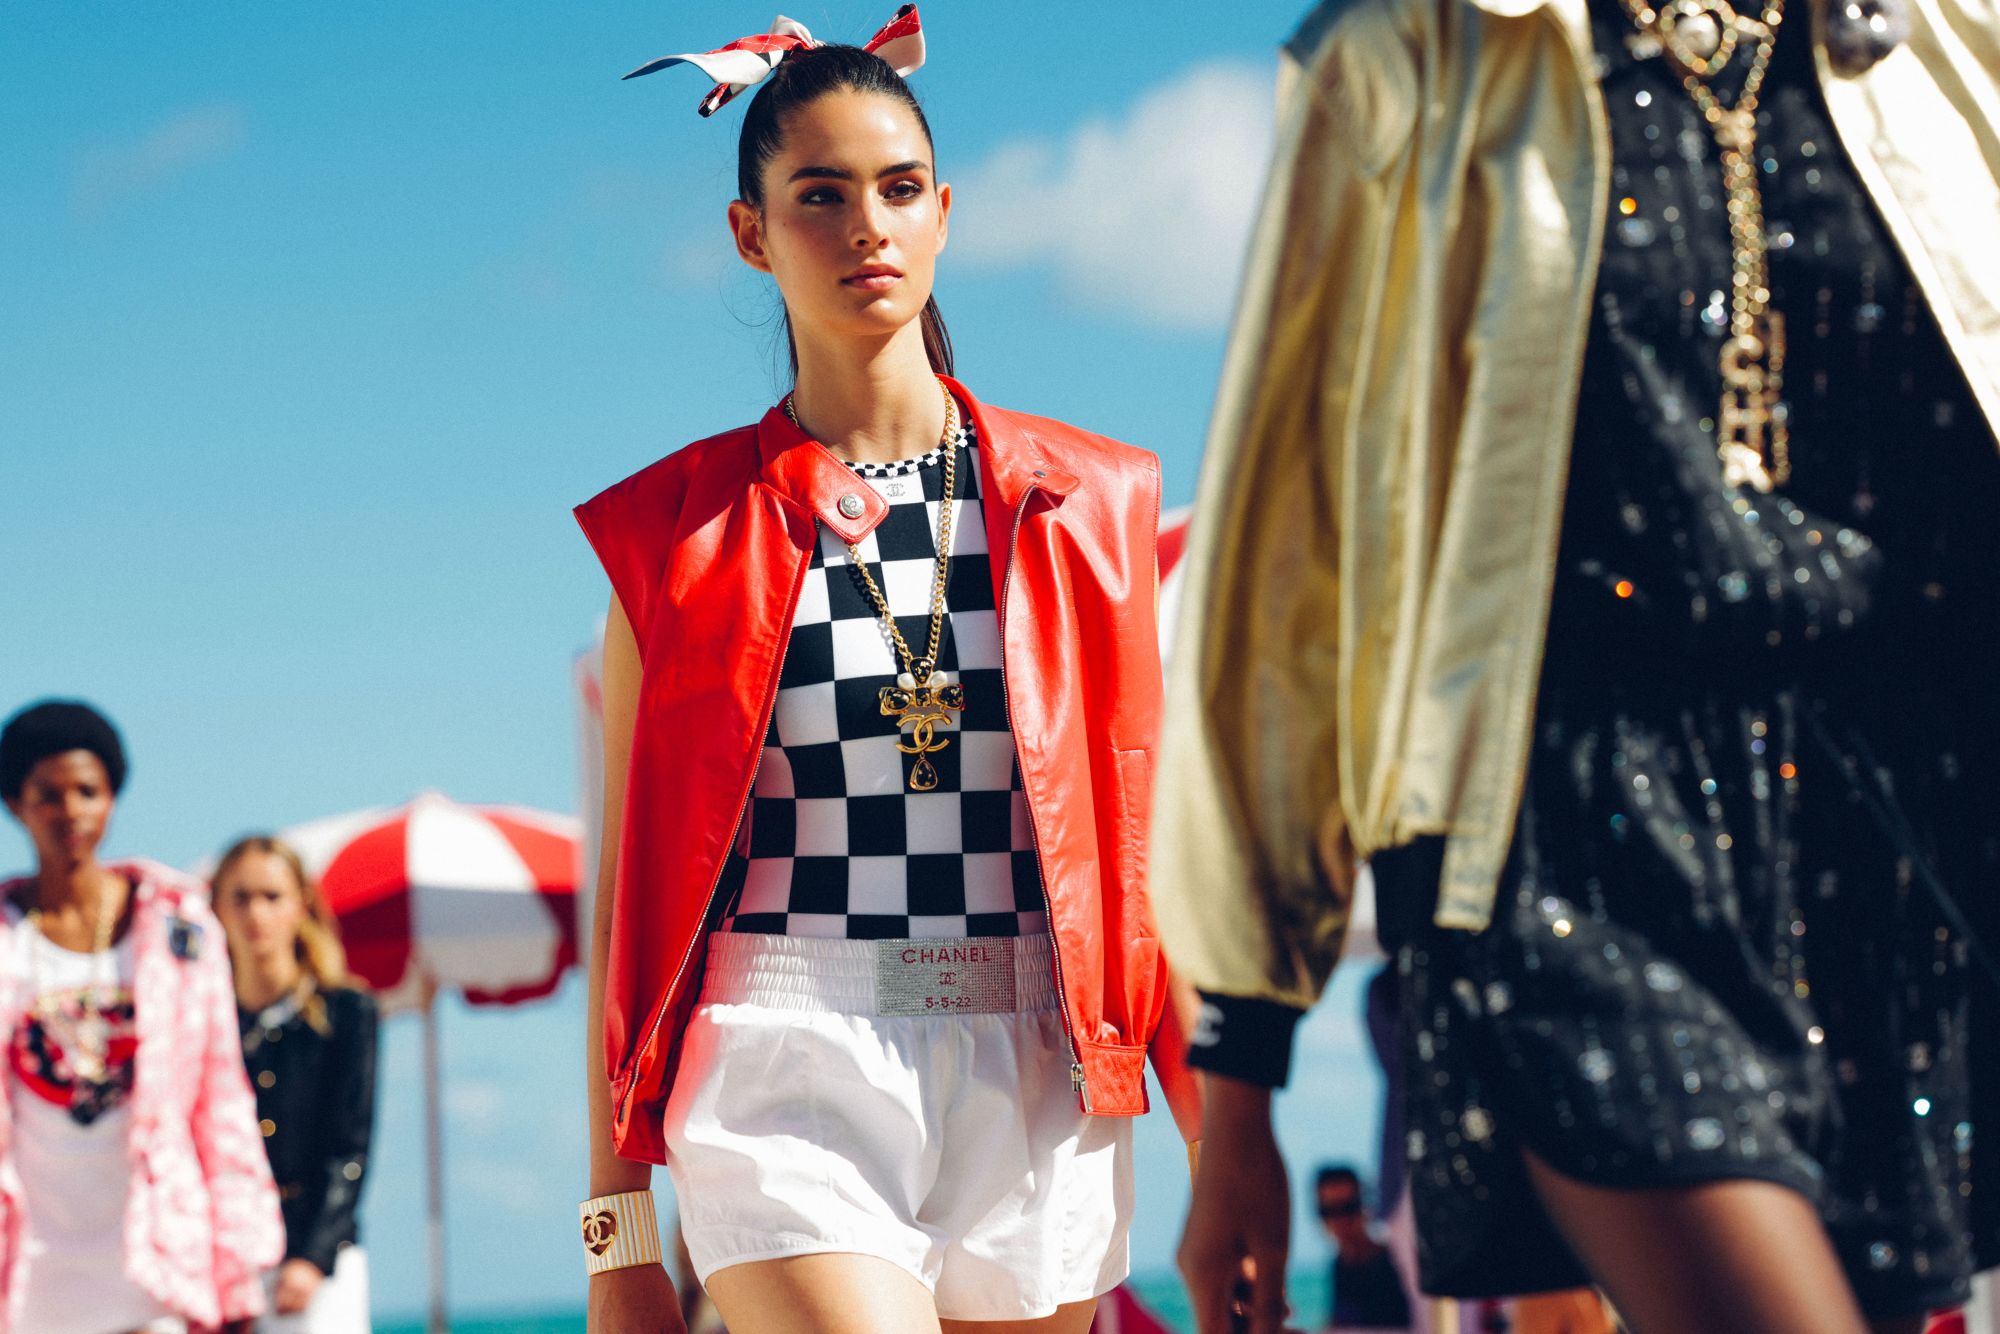 Inside Chanel's star-studded show in Miami